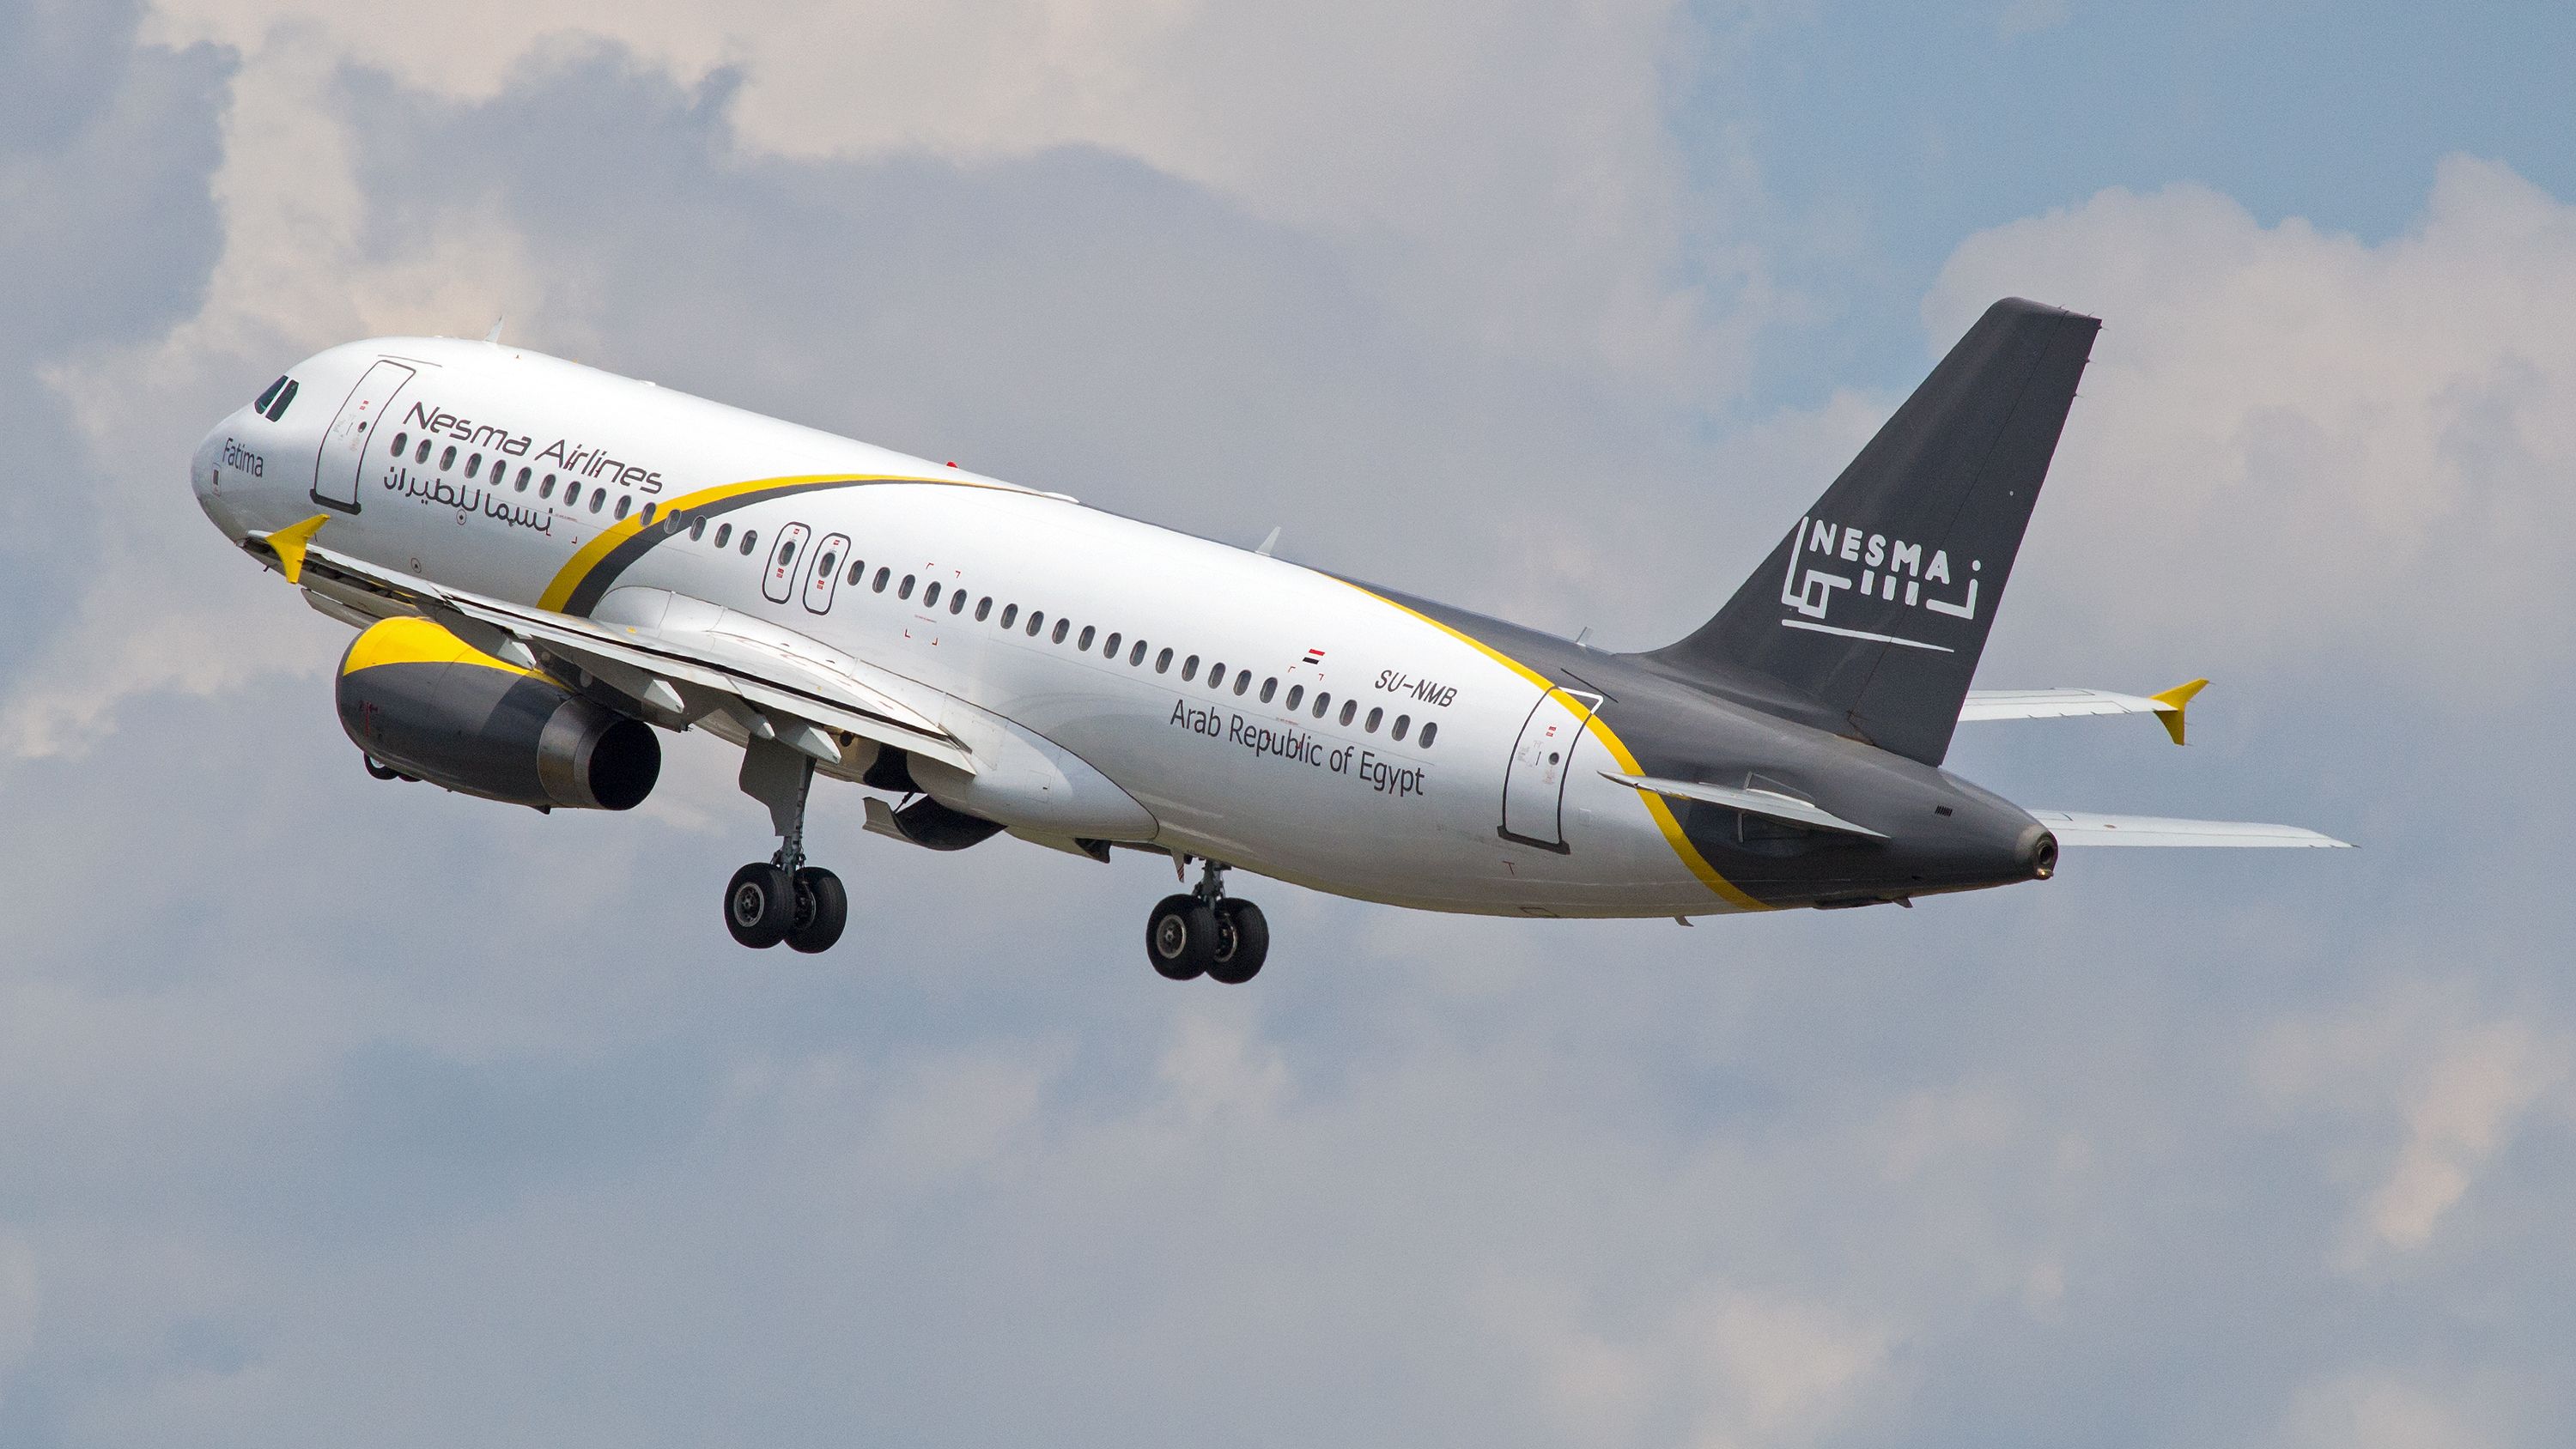 Nesma Airlines Airbus A320 Brings First Of 1,000 Gazan Children To UAE For Medical Care